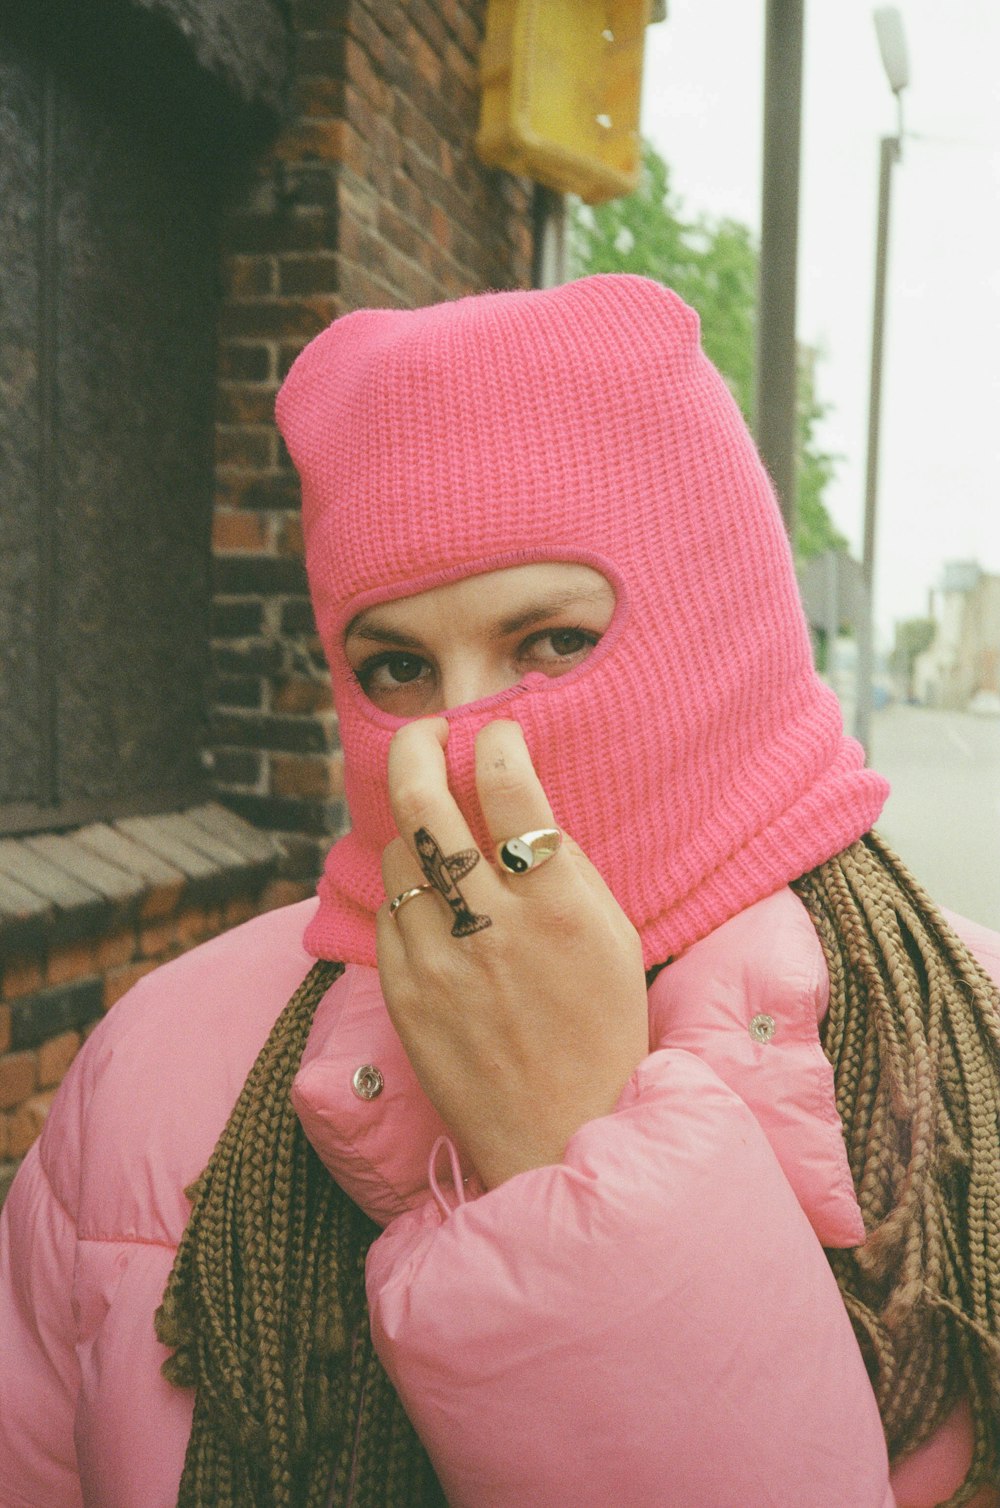 a person wearing a pink head scarf and holding a finger up